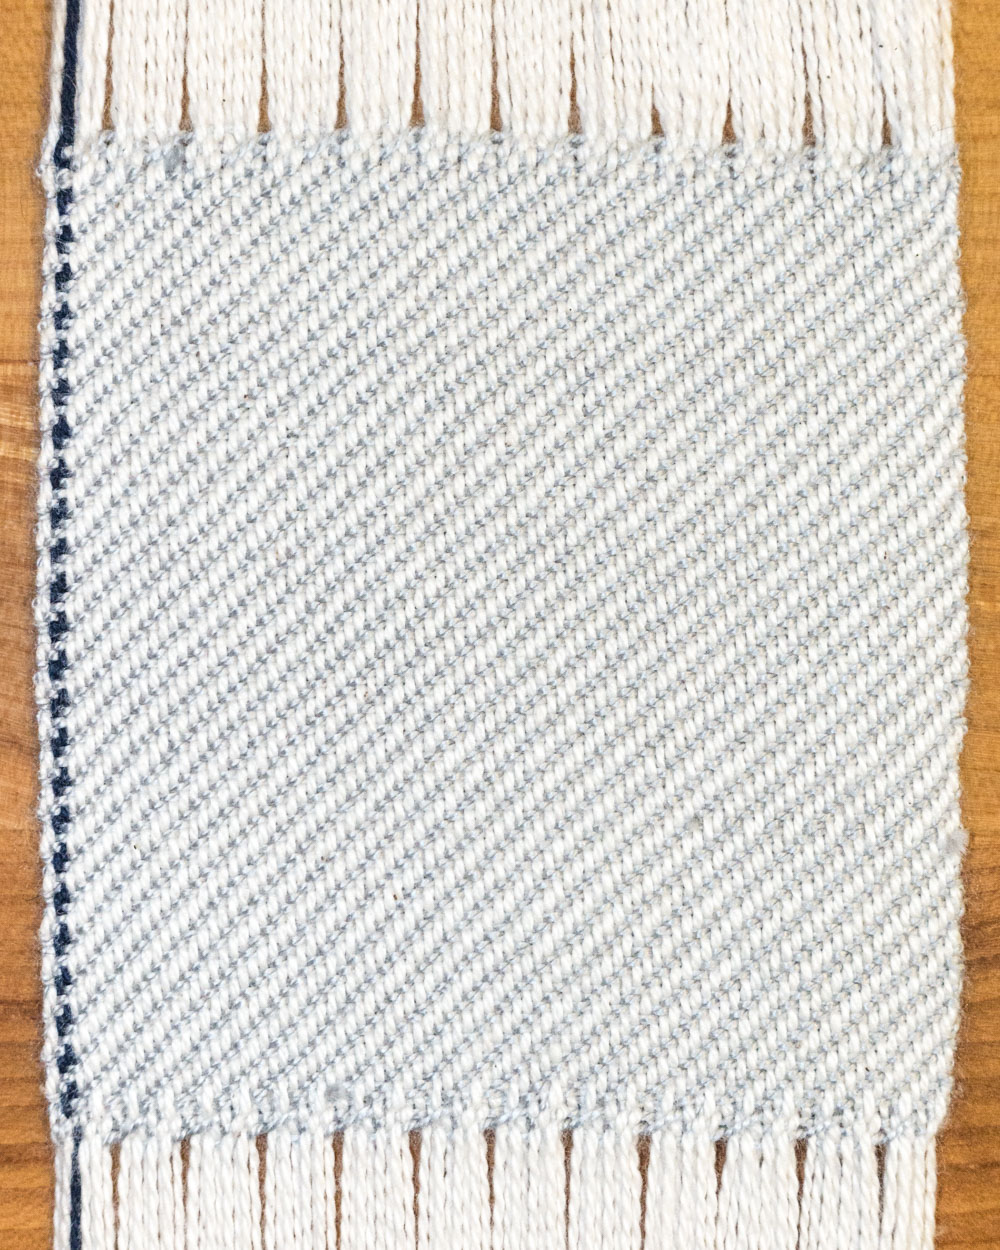 square of twill fabric with acrylic weft